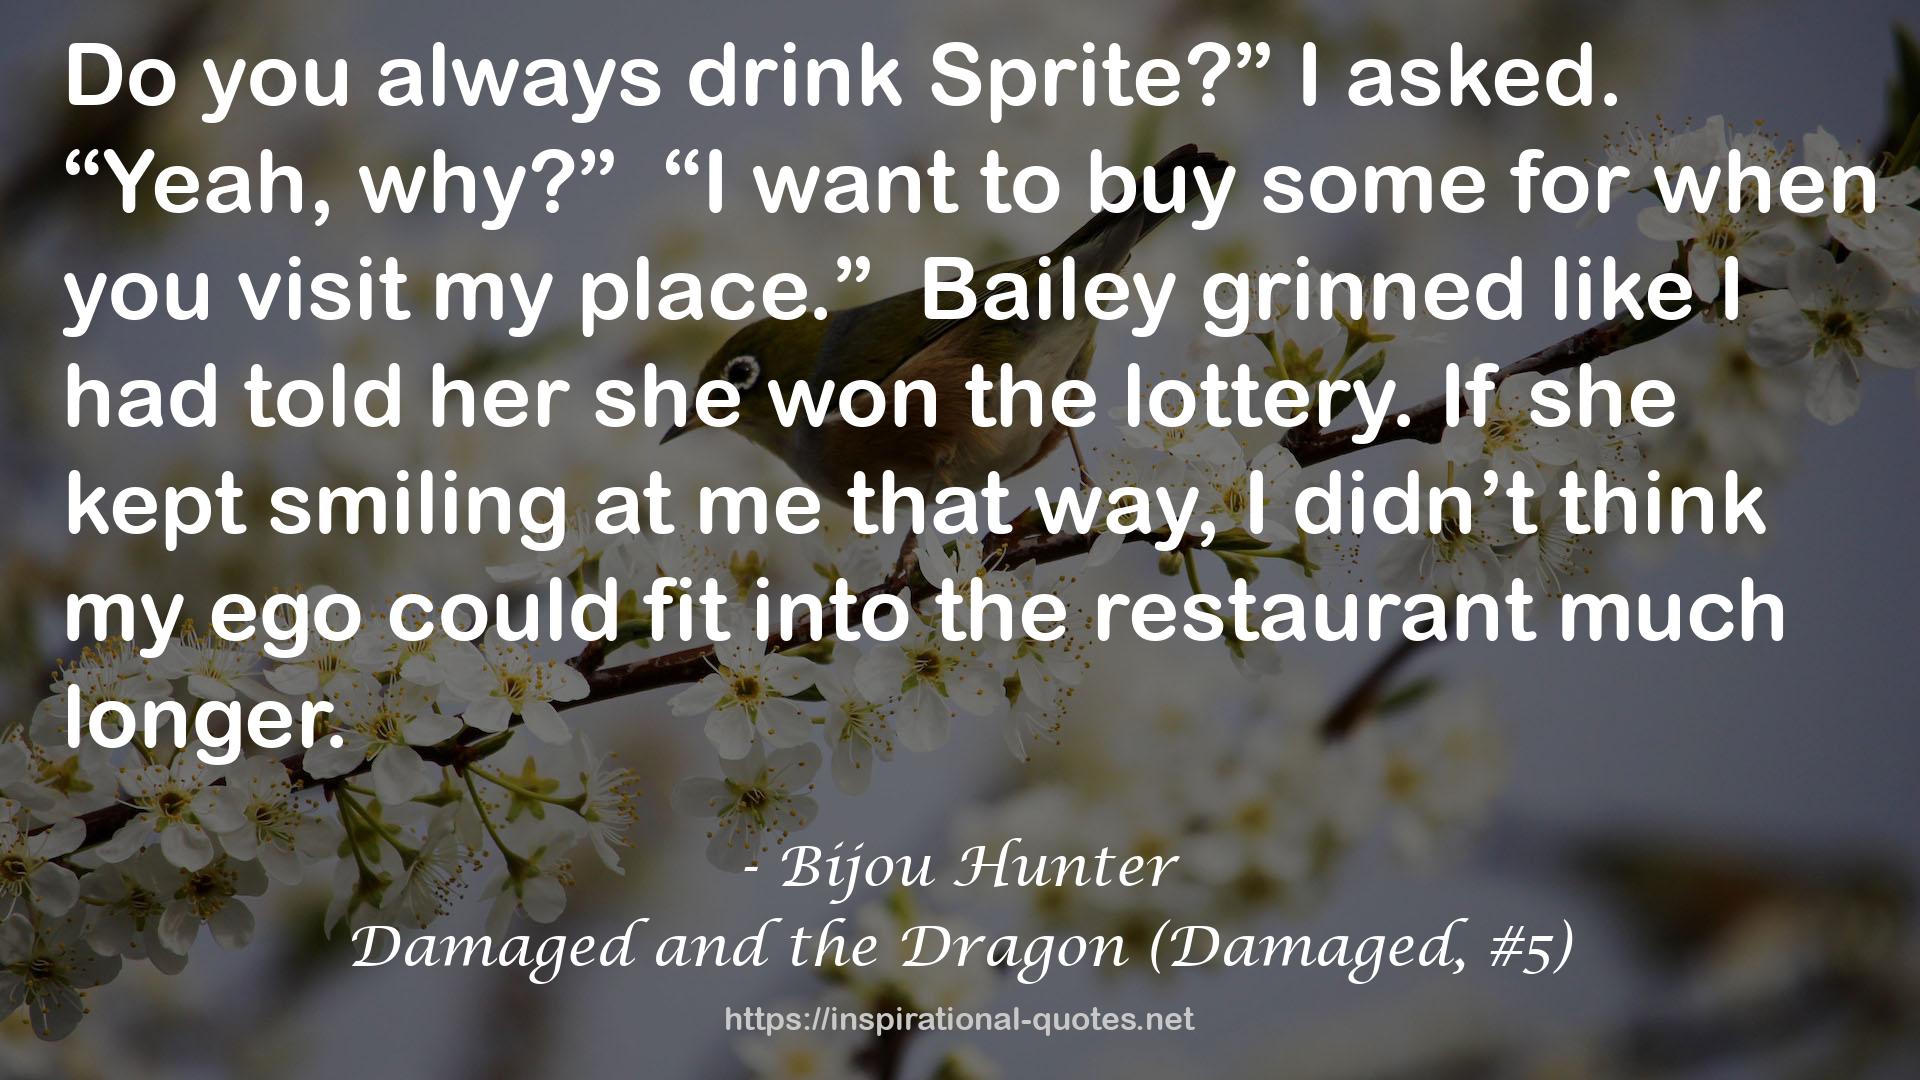 Damaged and the Dragon (Damaged, #5) QUOTES